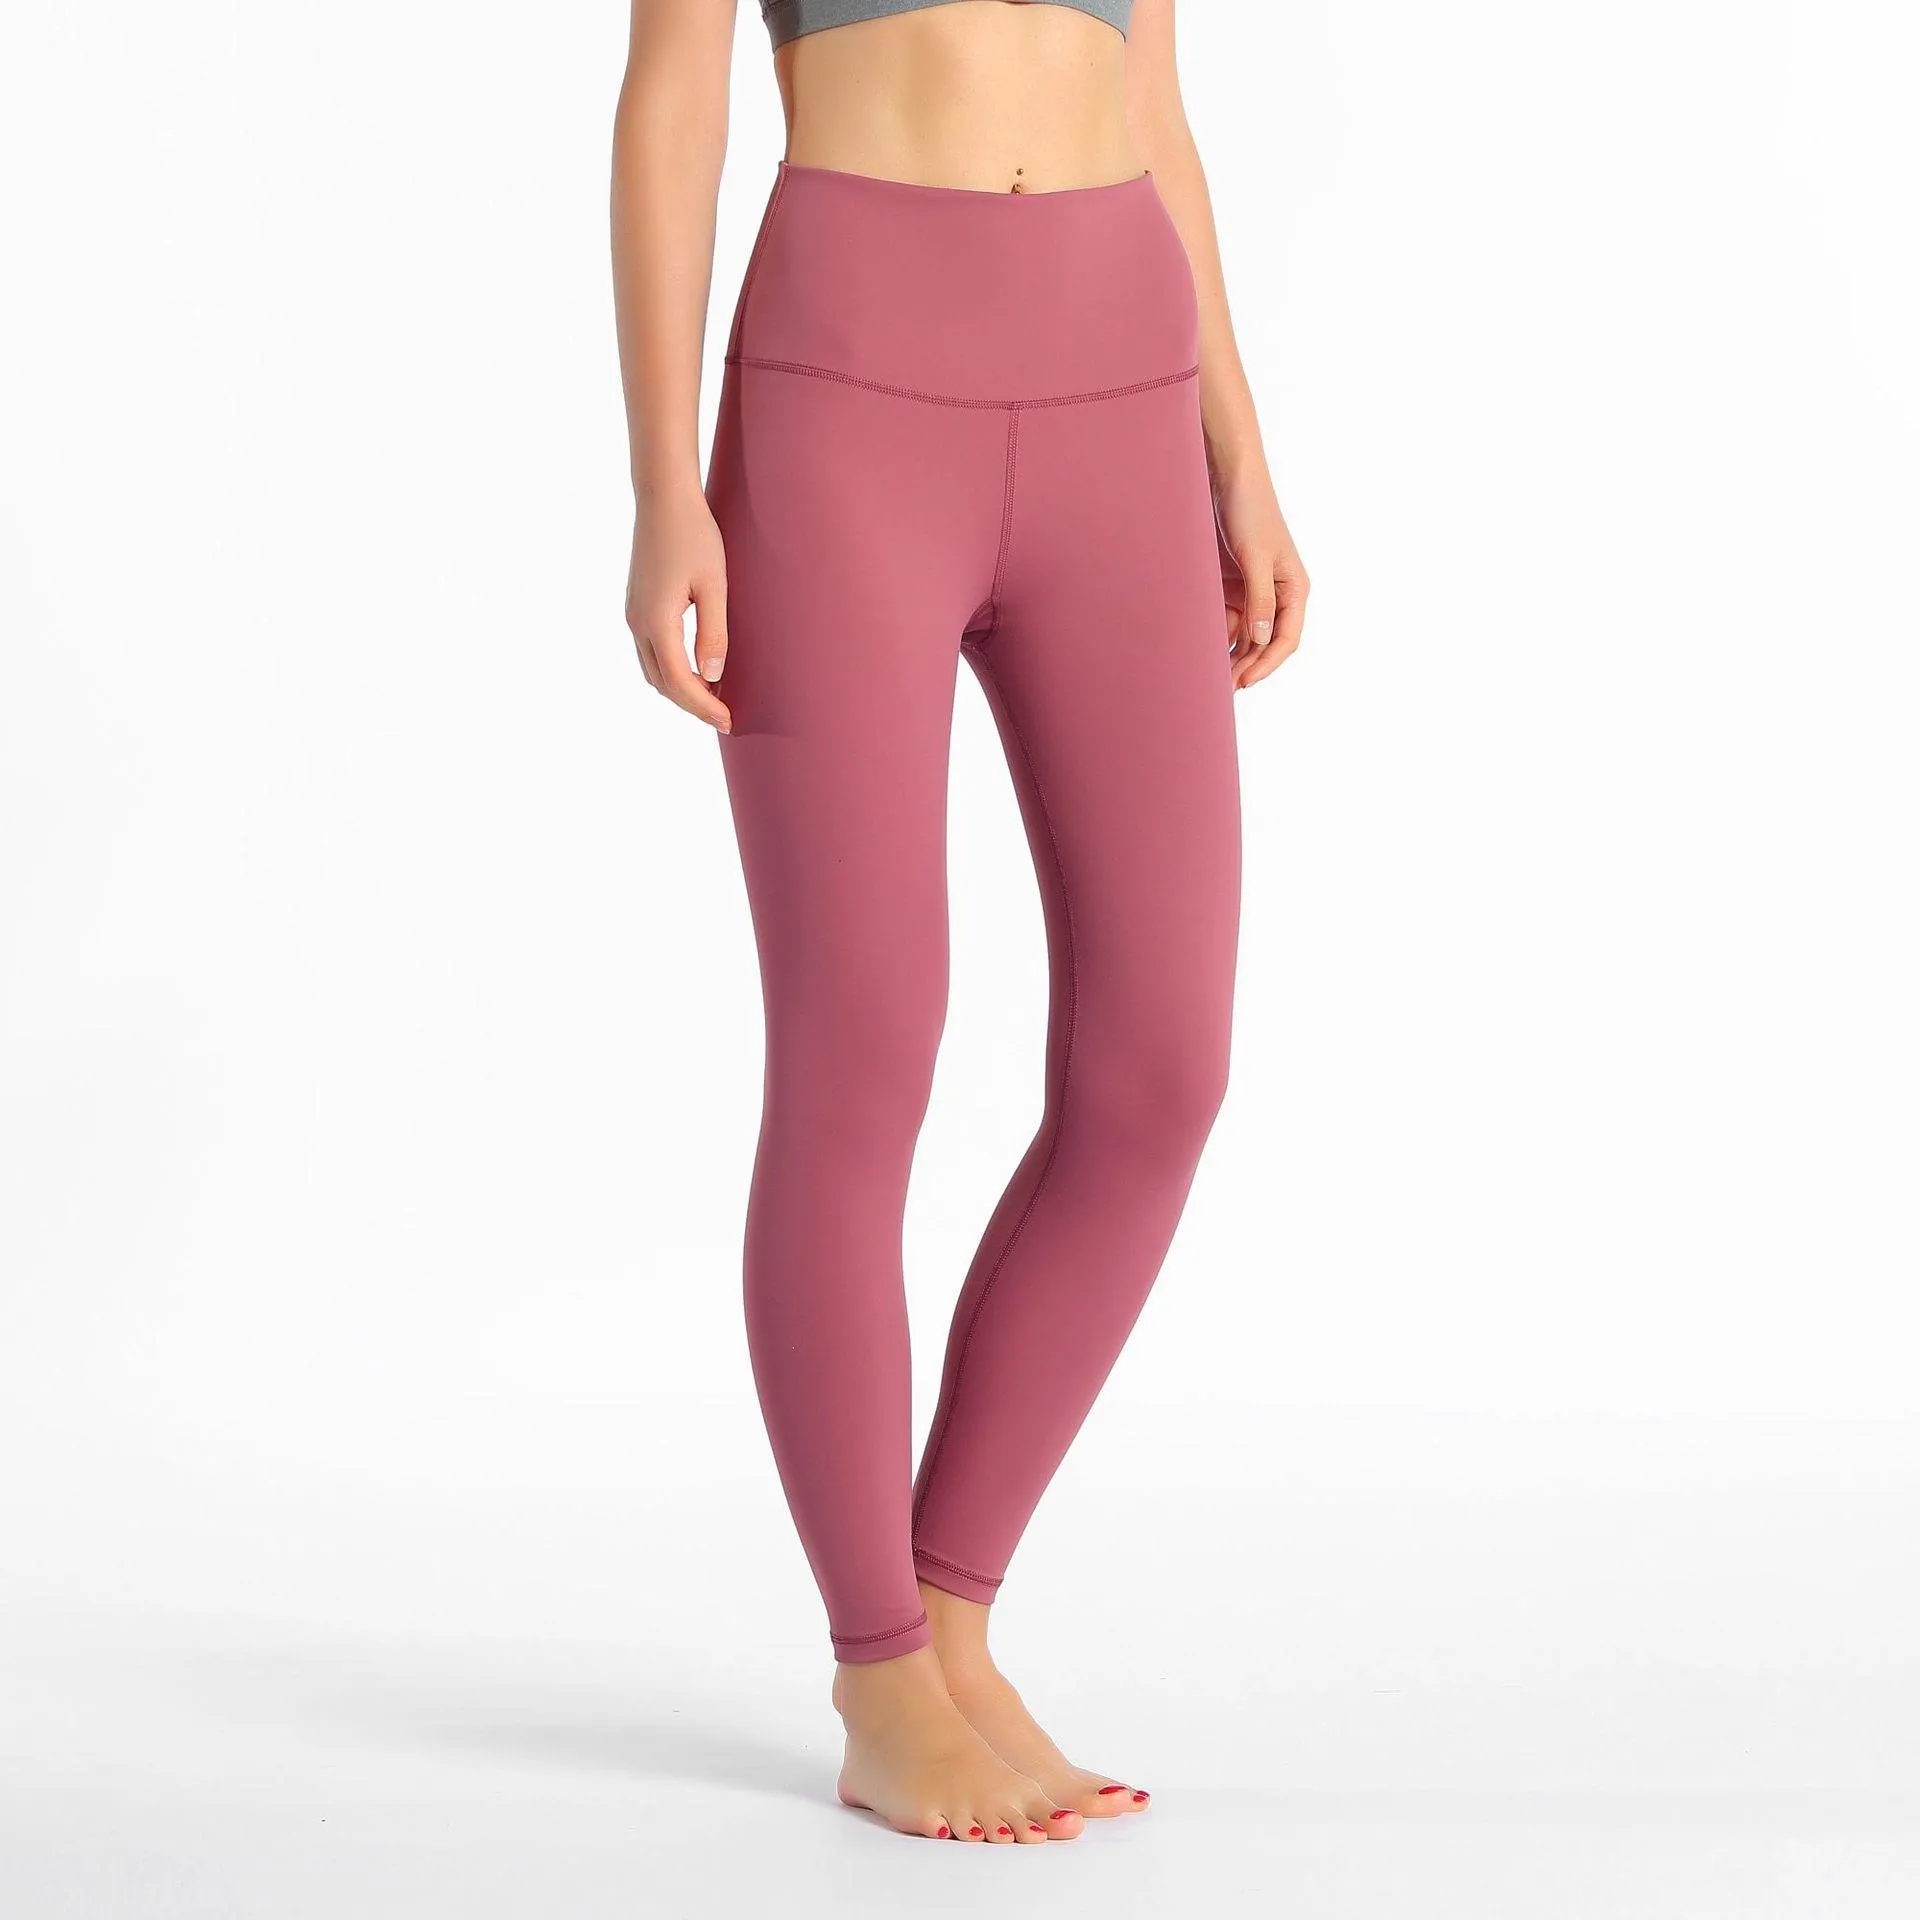 High Waist Balance Collection Yoga Pants For Women And Girls Solid Color  Fitness Athletic Leggings For Running And Workouts Size 32 U4DR#5458062  From Jkcz, $18.34